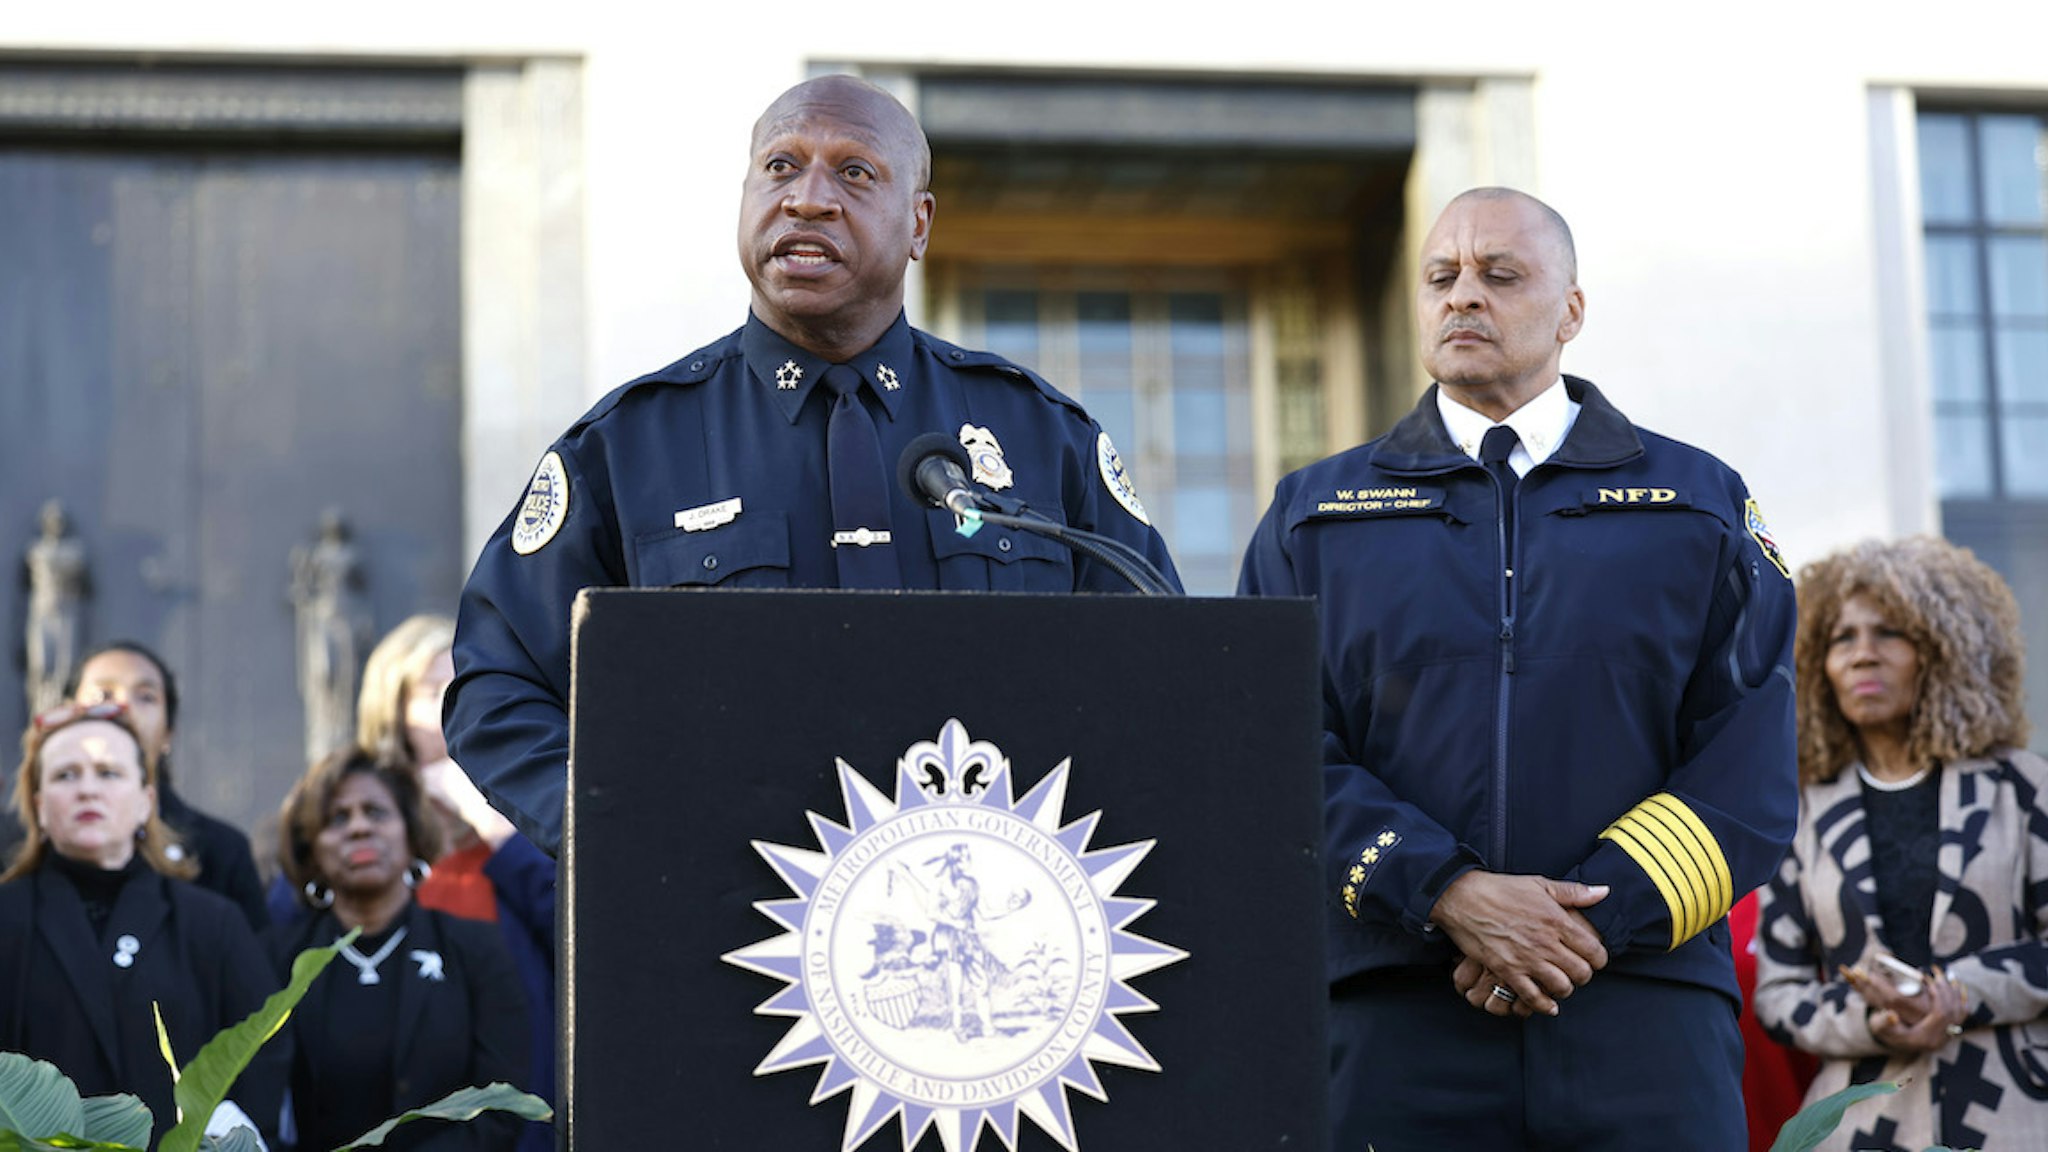 Nashville Chief of Police John Drake and Nashville Fire Department Chief William Swann attend a candlelight vigil to mourn and honor the lives of the victims, survivors and families of The Covenant School on March 29, 2023 in Nashville, Tennessee. (Photo by Jason Kempin/Getty Images)